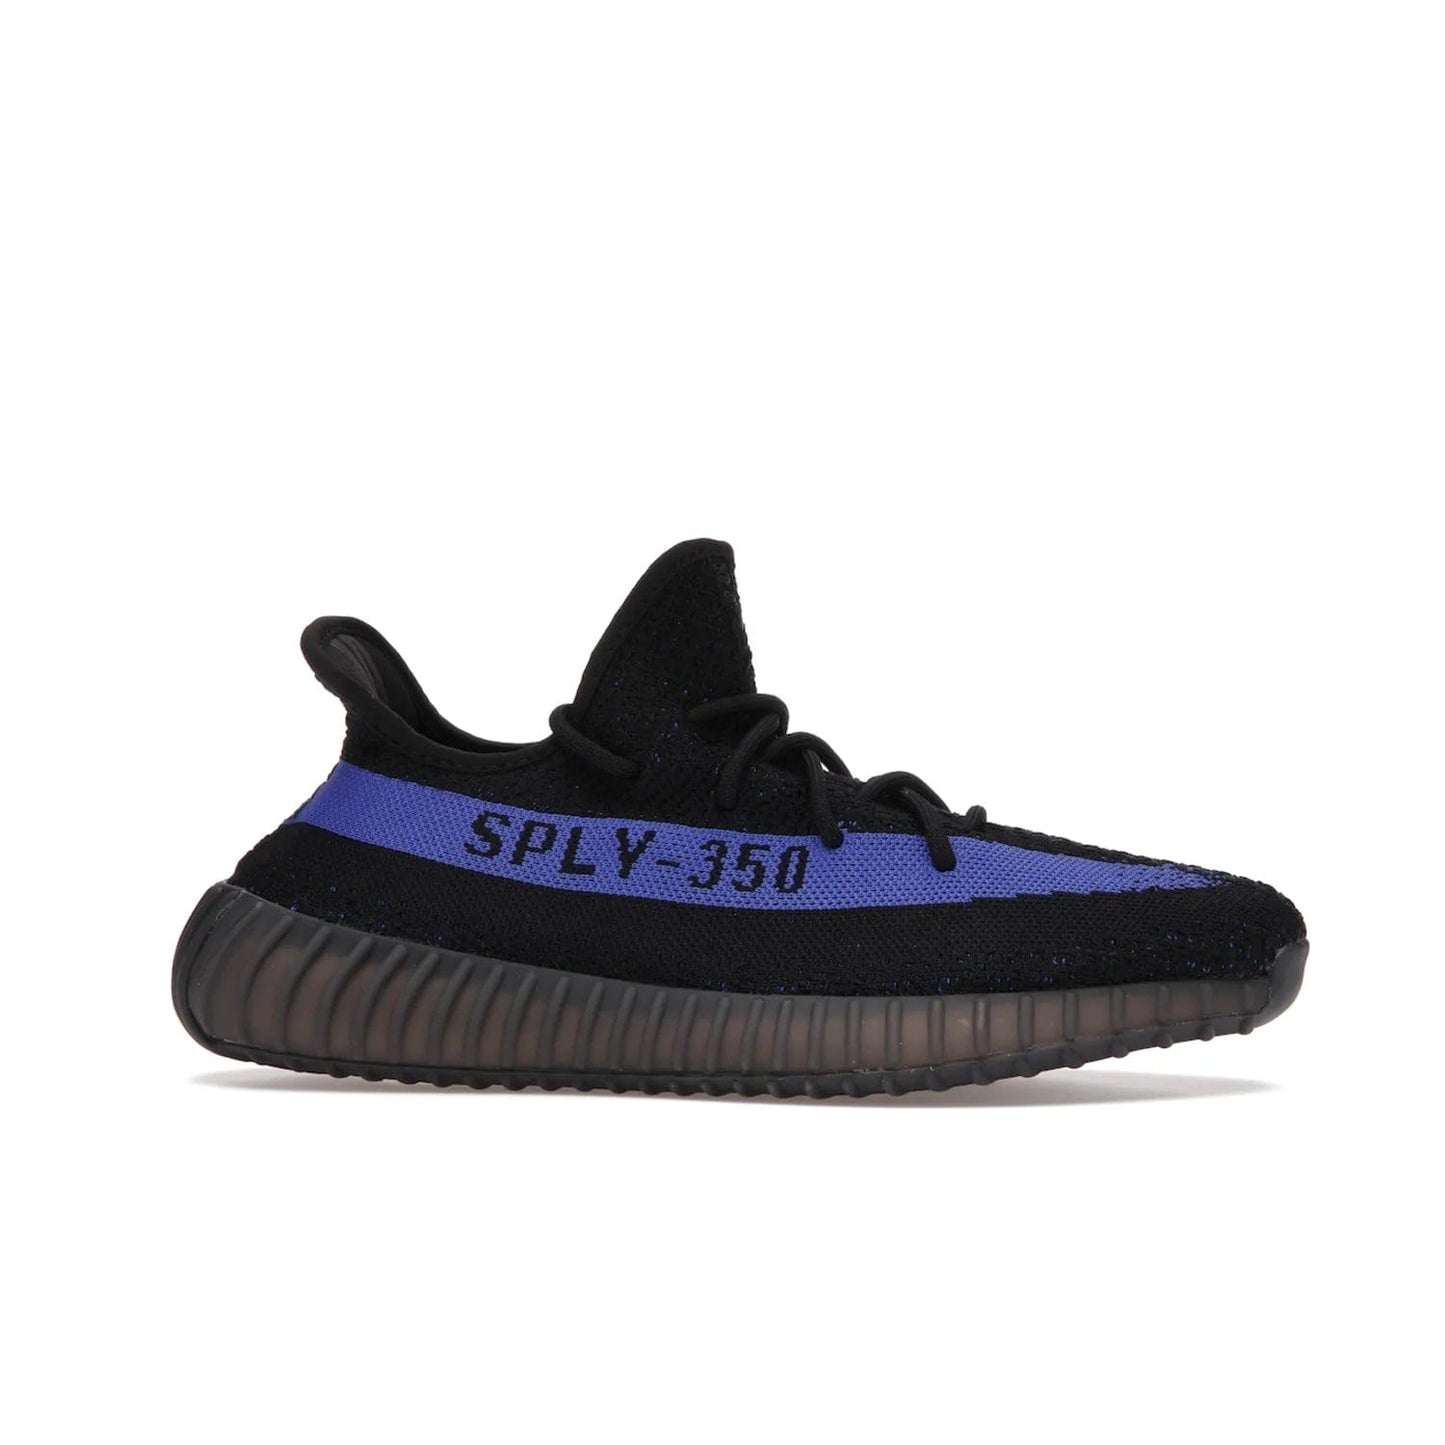 adidas Yeezy Boost 350 V2 Dazzling Blue - Image 2 - Only at www.BallersClubKickz.com - Shop the Adidas Yeezy 350 V2 Dazzling Blue, featuring a solid black Primeknit upper, Dazzling Blue side stripe, “SPLY-350” text, and a muted Boost sole. Releasing Feb 2022, this style is perfect for any shoe fan.